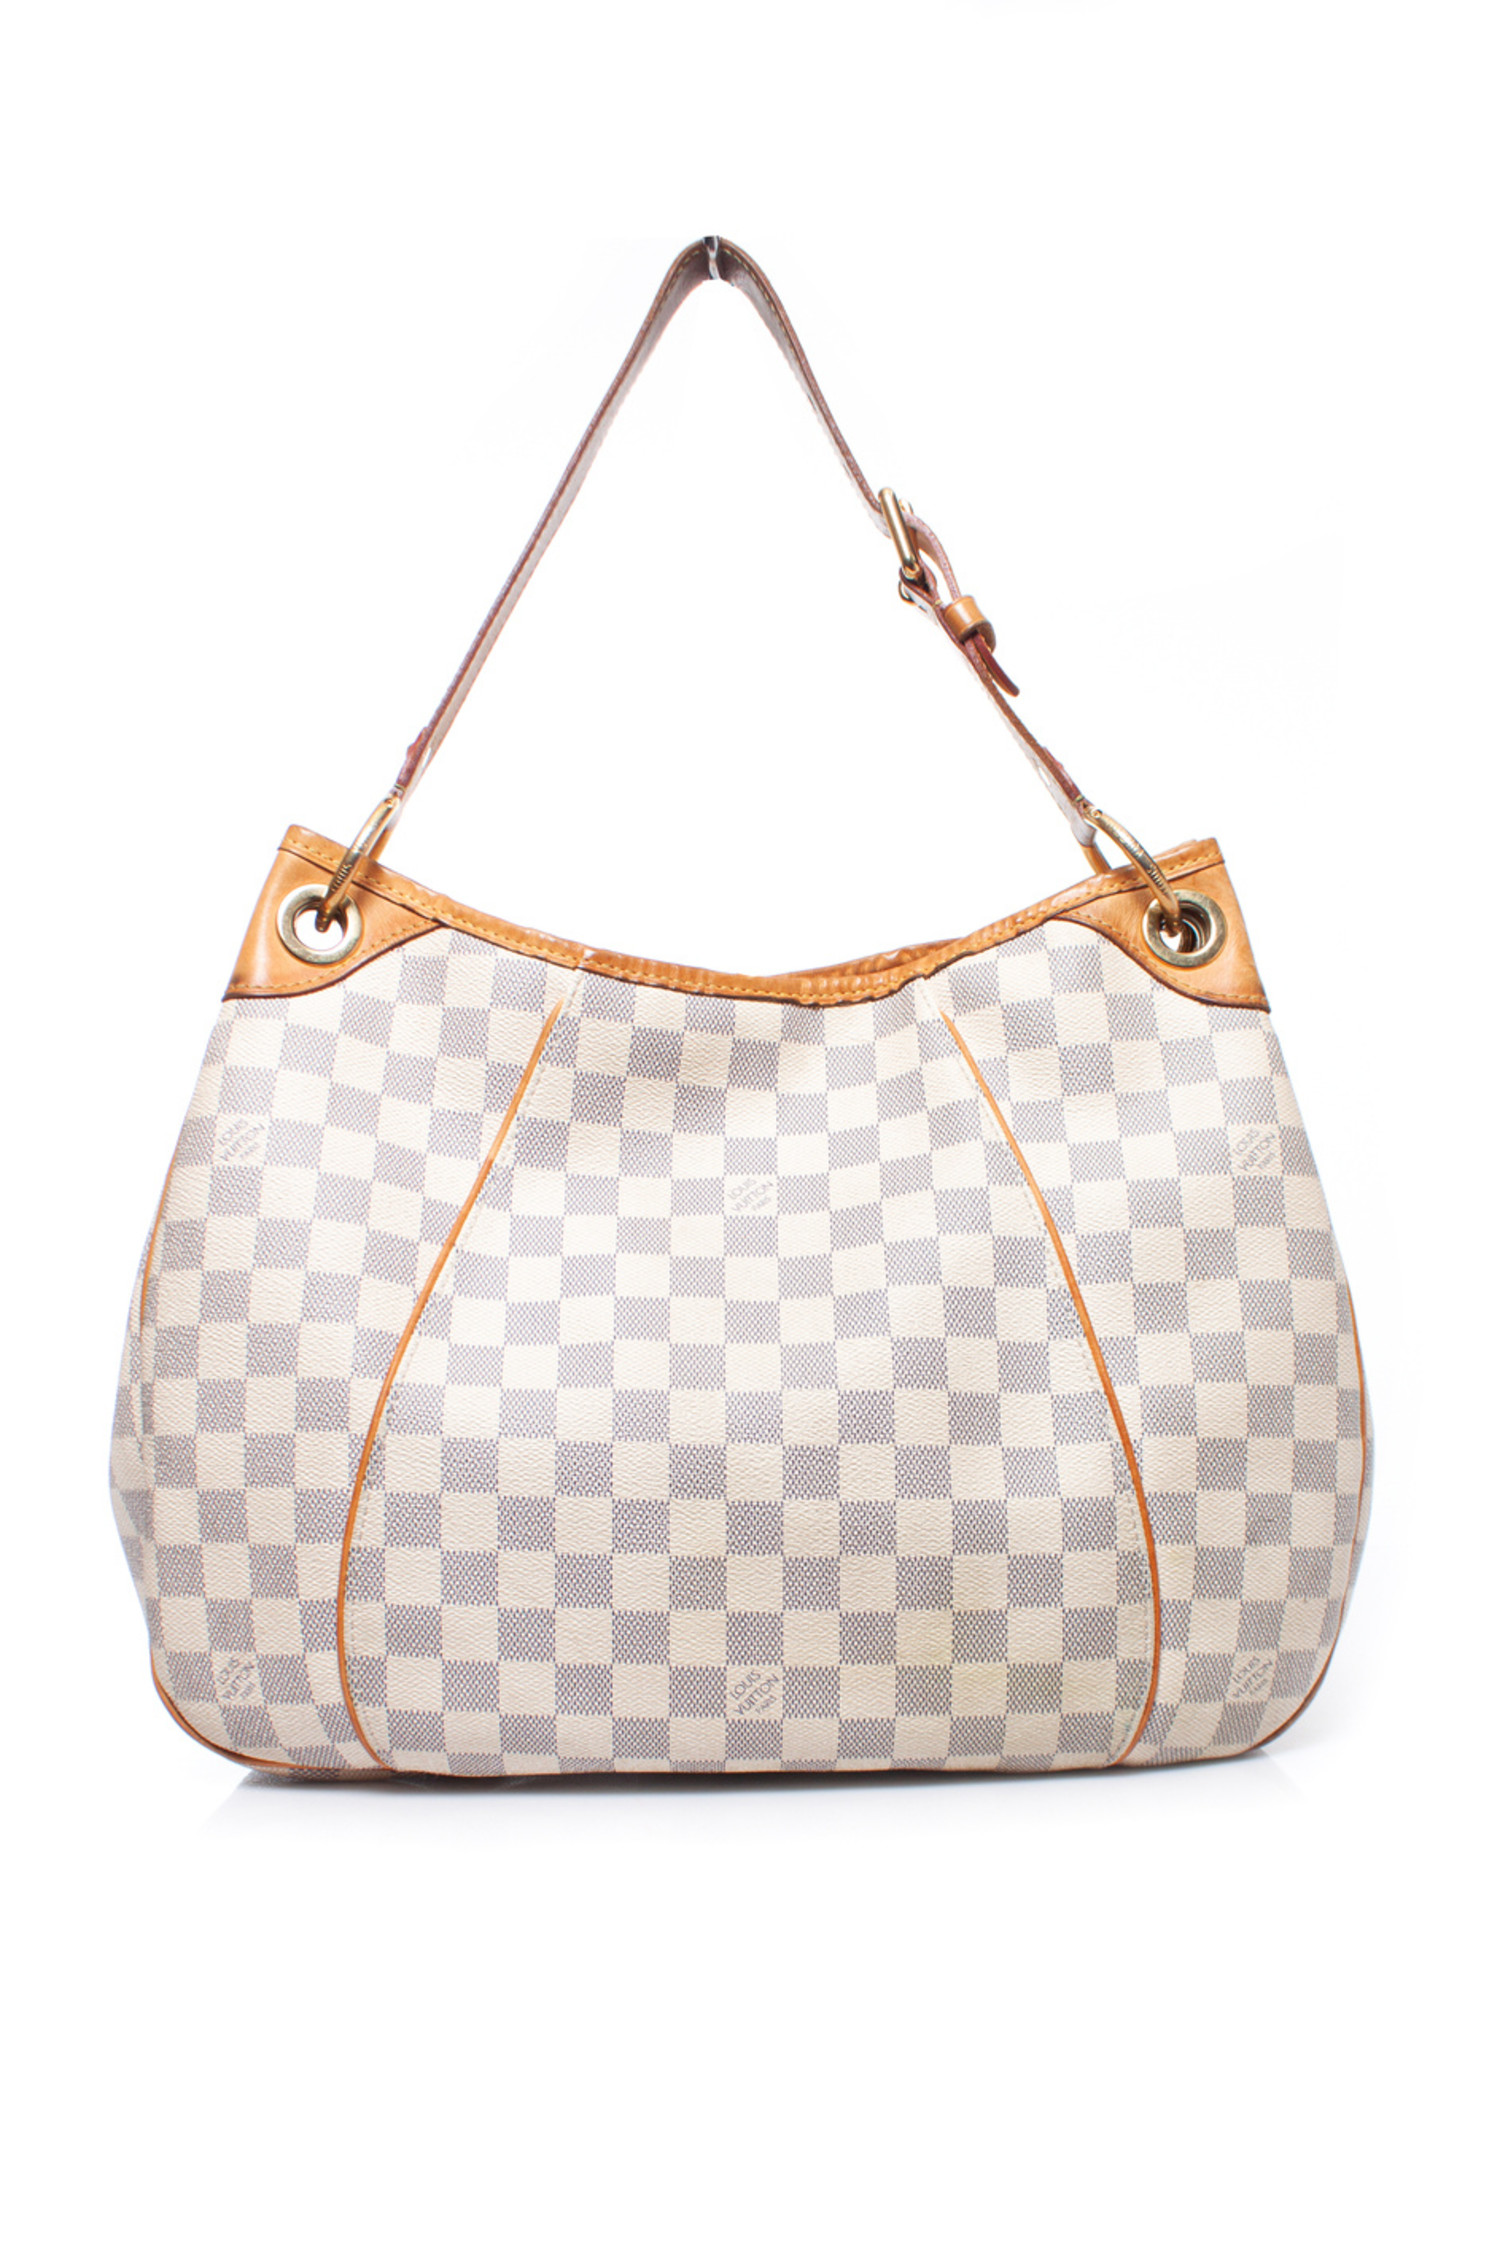 Shoulder - Galliera - Finally Unveils the Upcoming Louis Vuitton x